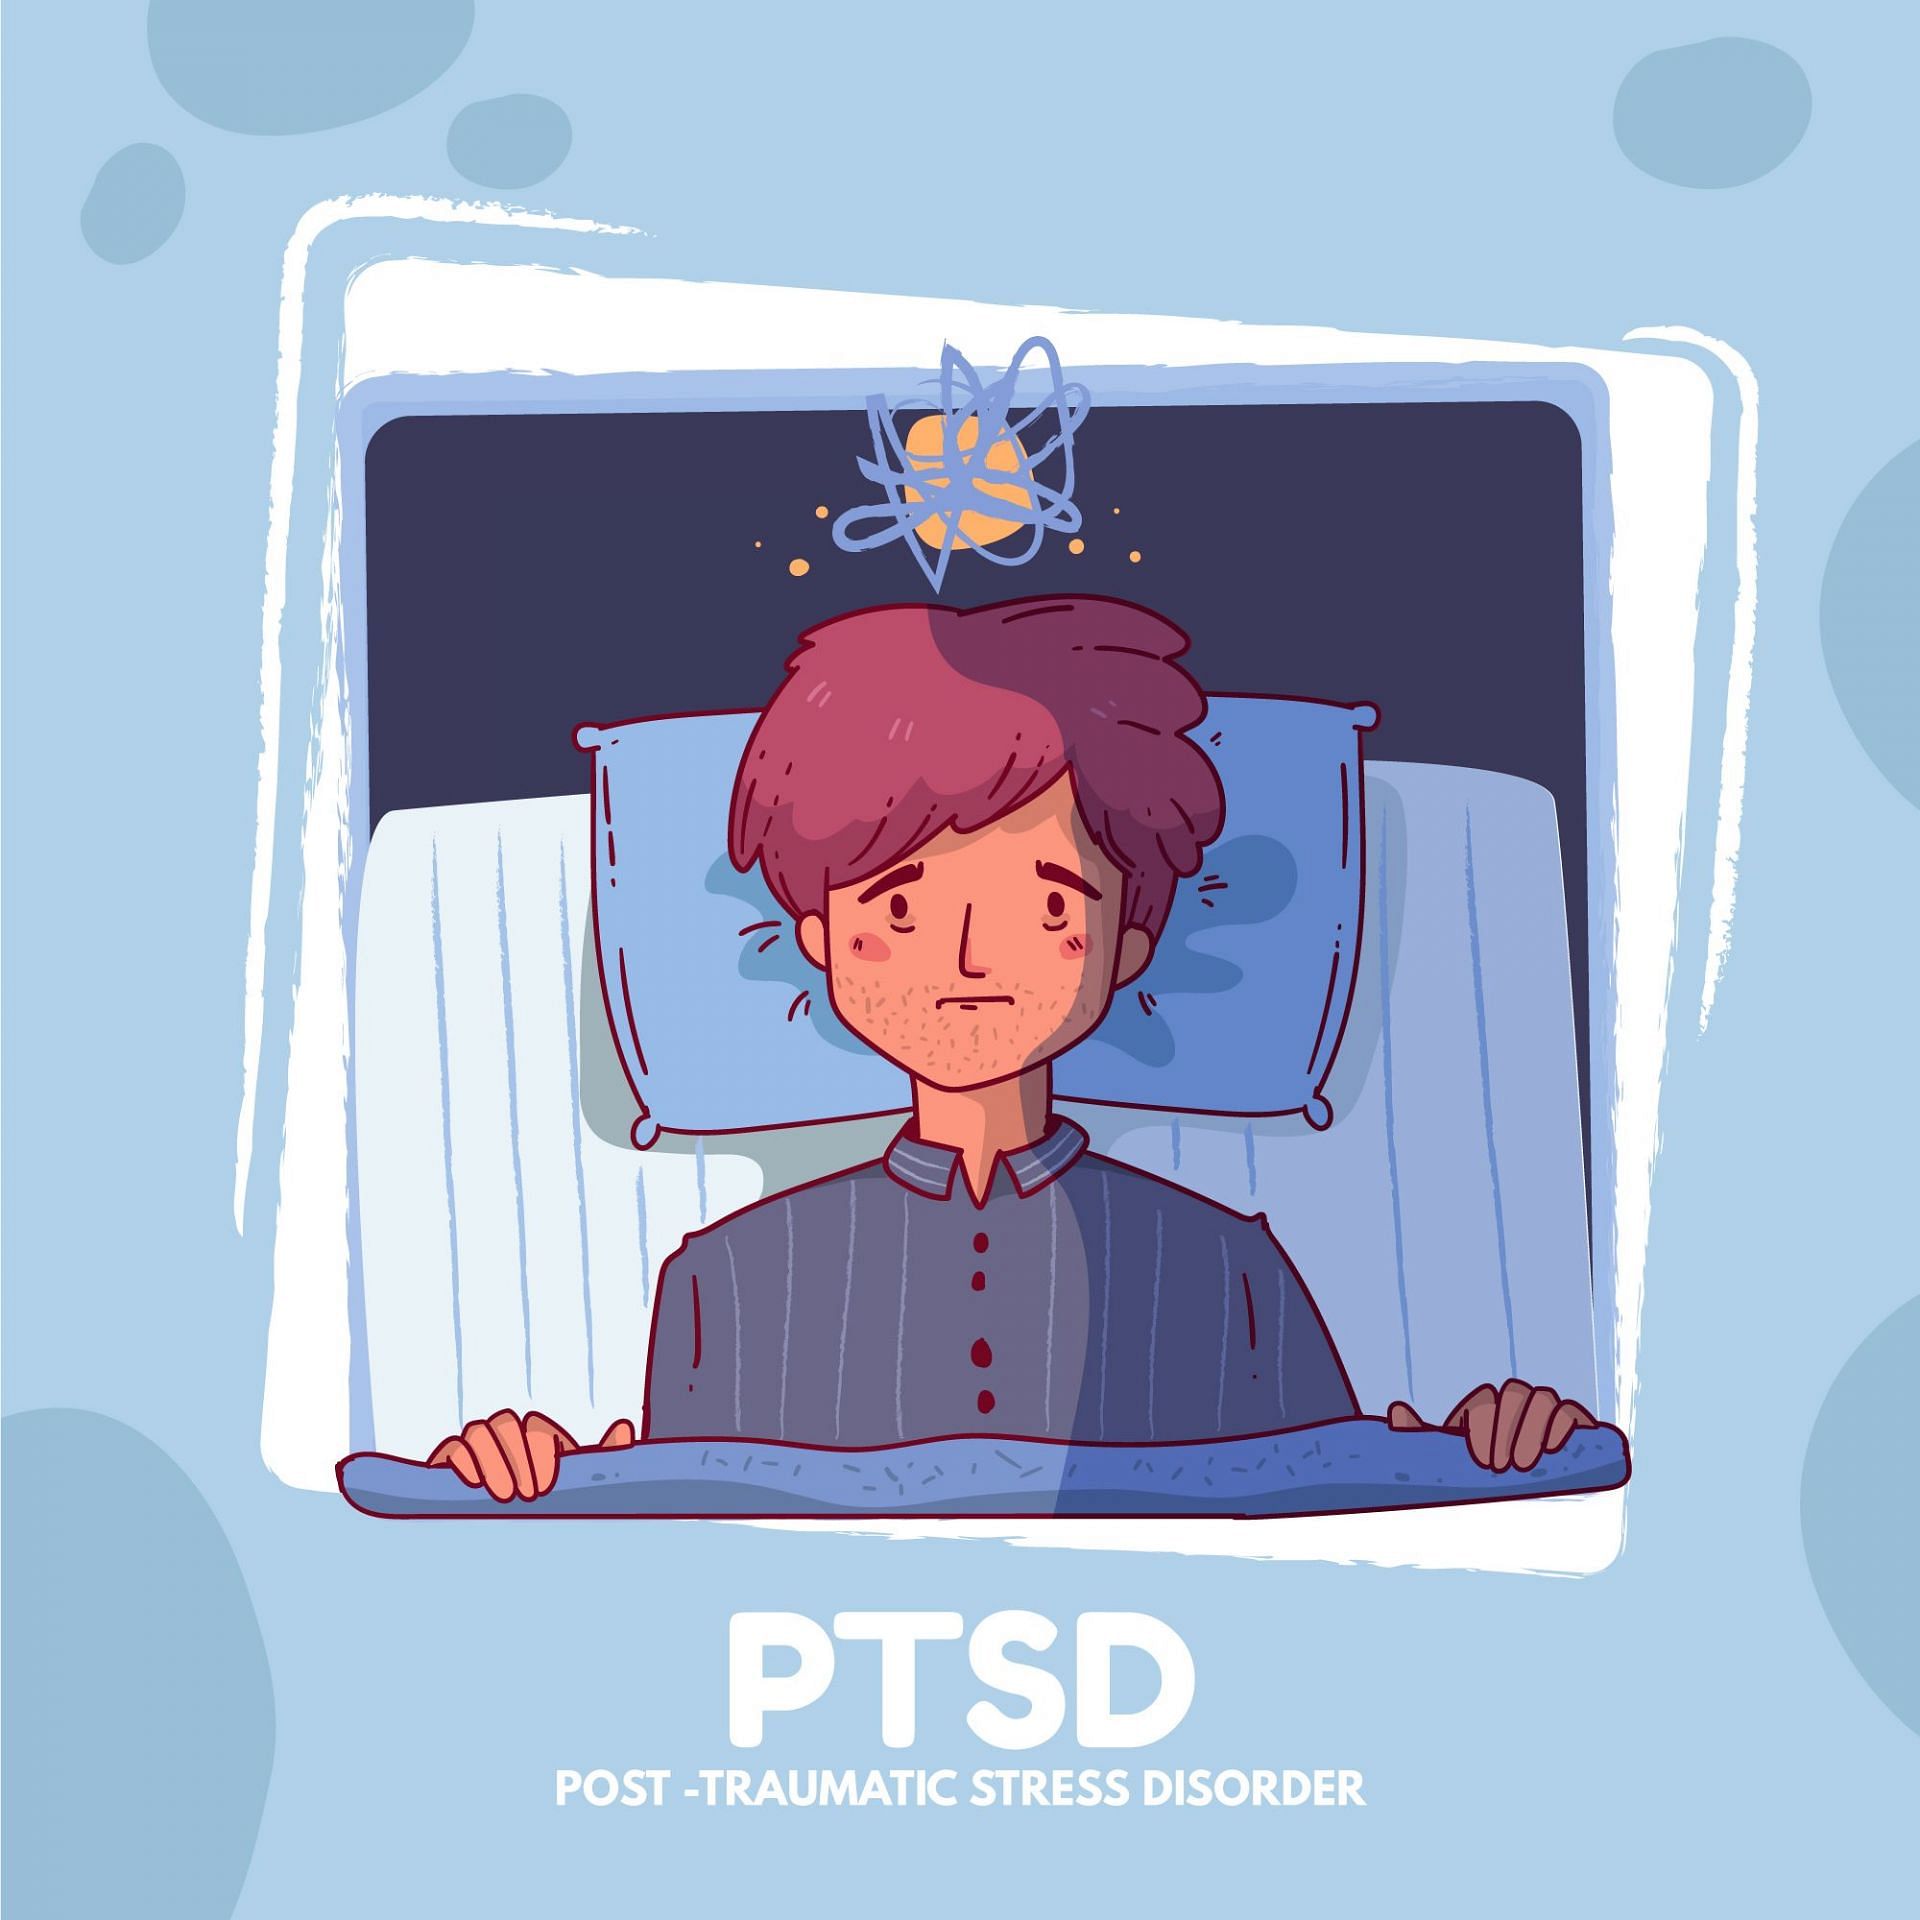 How do we cope with PTSD triggers? Can we manage them on our own? (Image via Freepik/ Freepik)